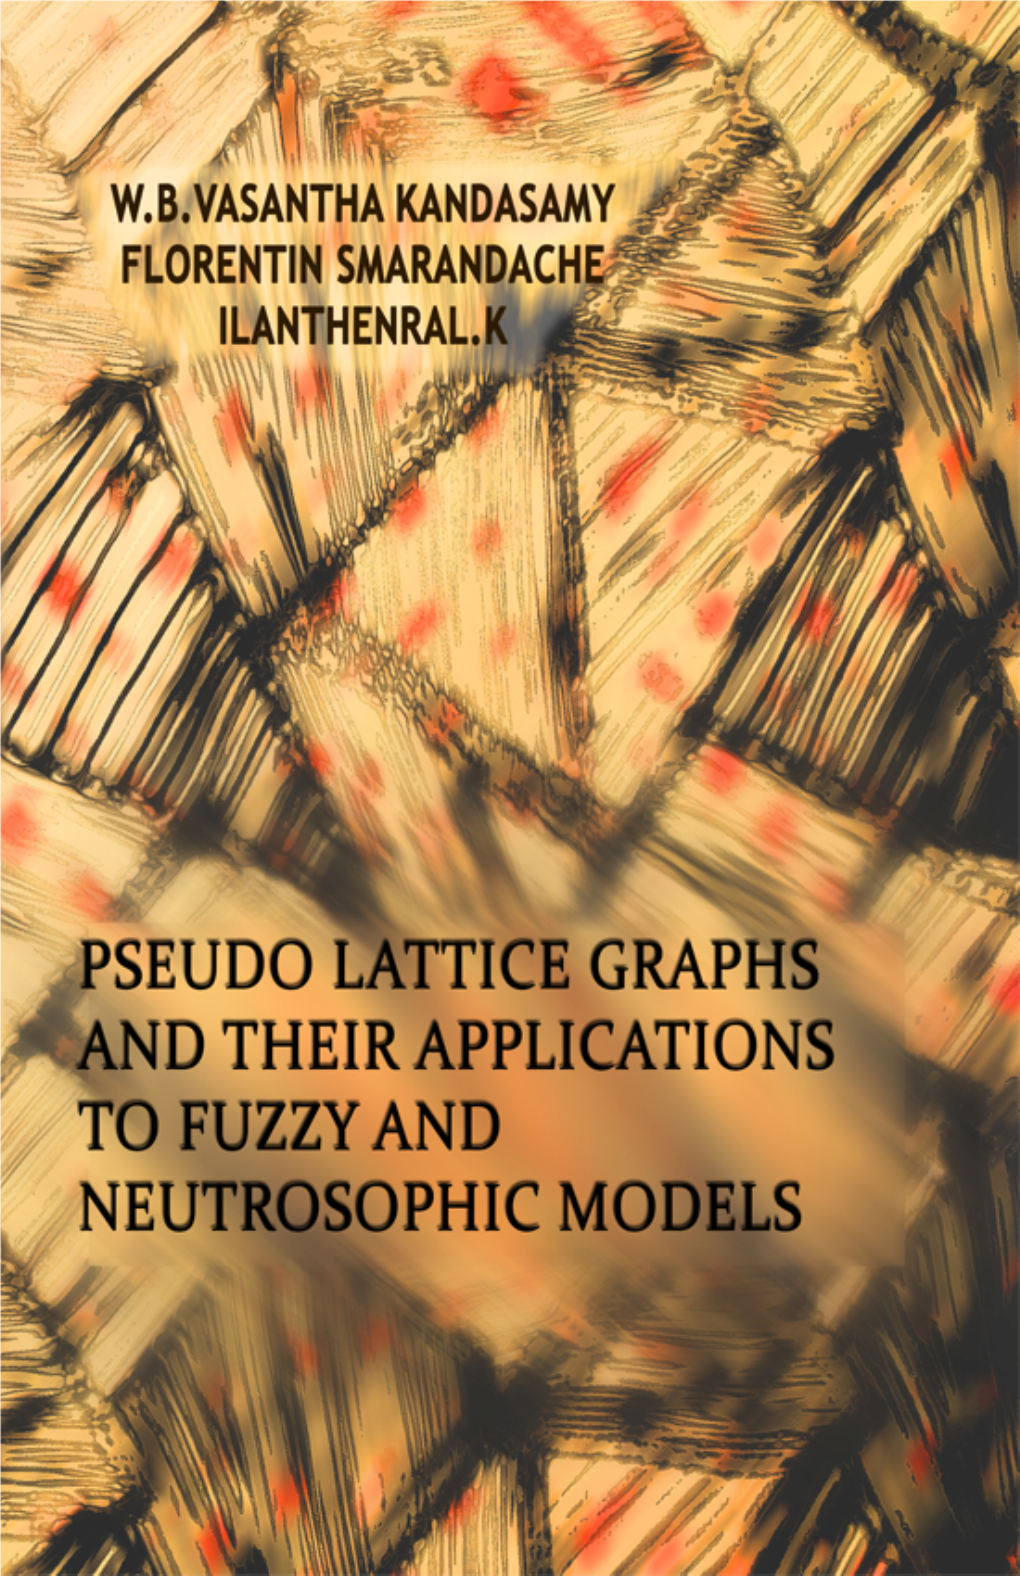 Pseudo Lattice Graphs and Their Applications to Fuzzy and Neutrosophic Models